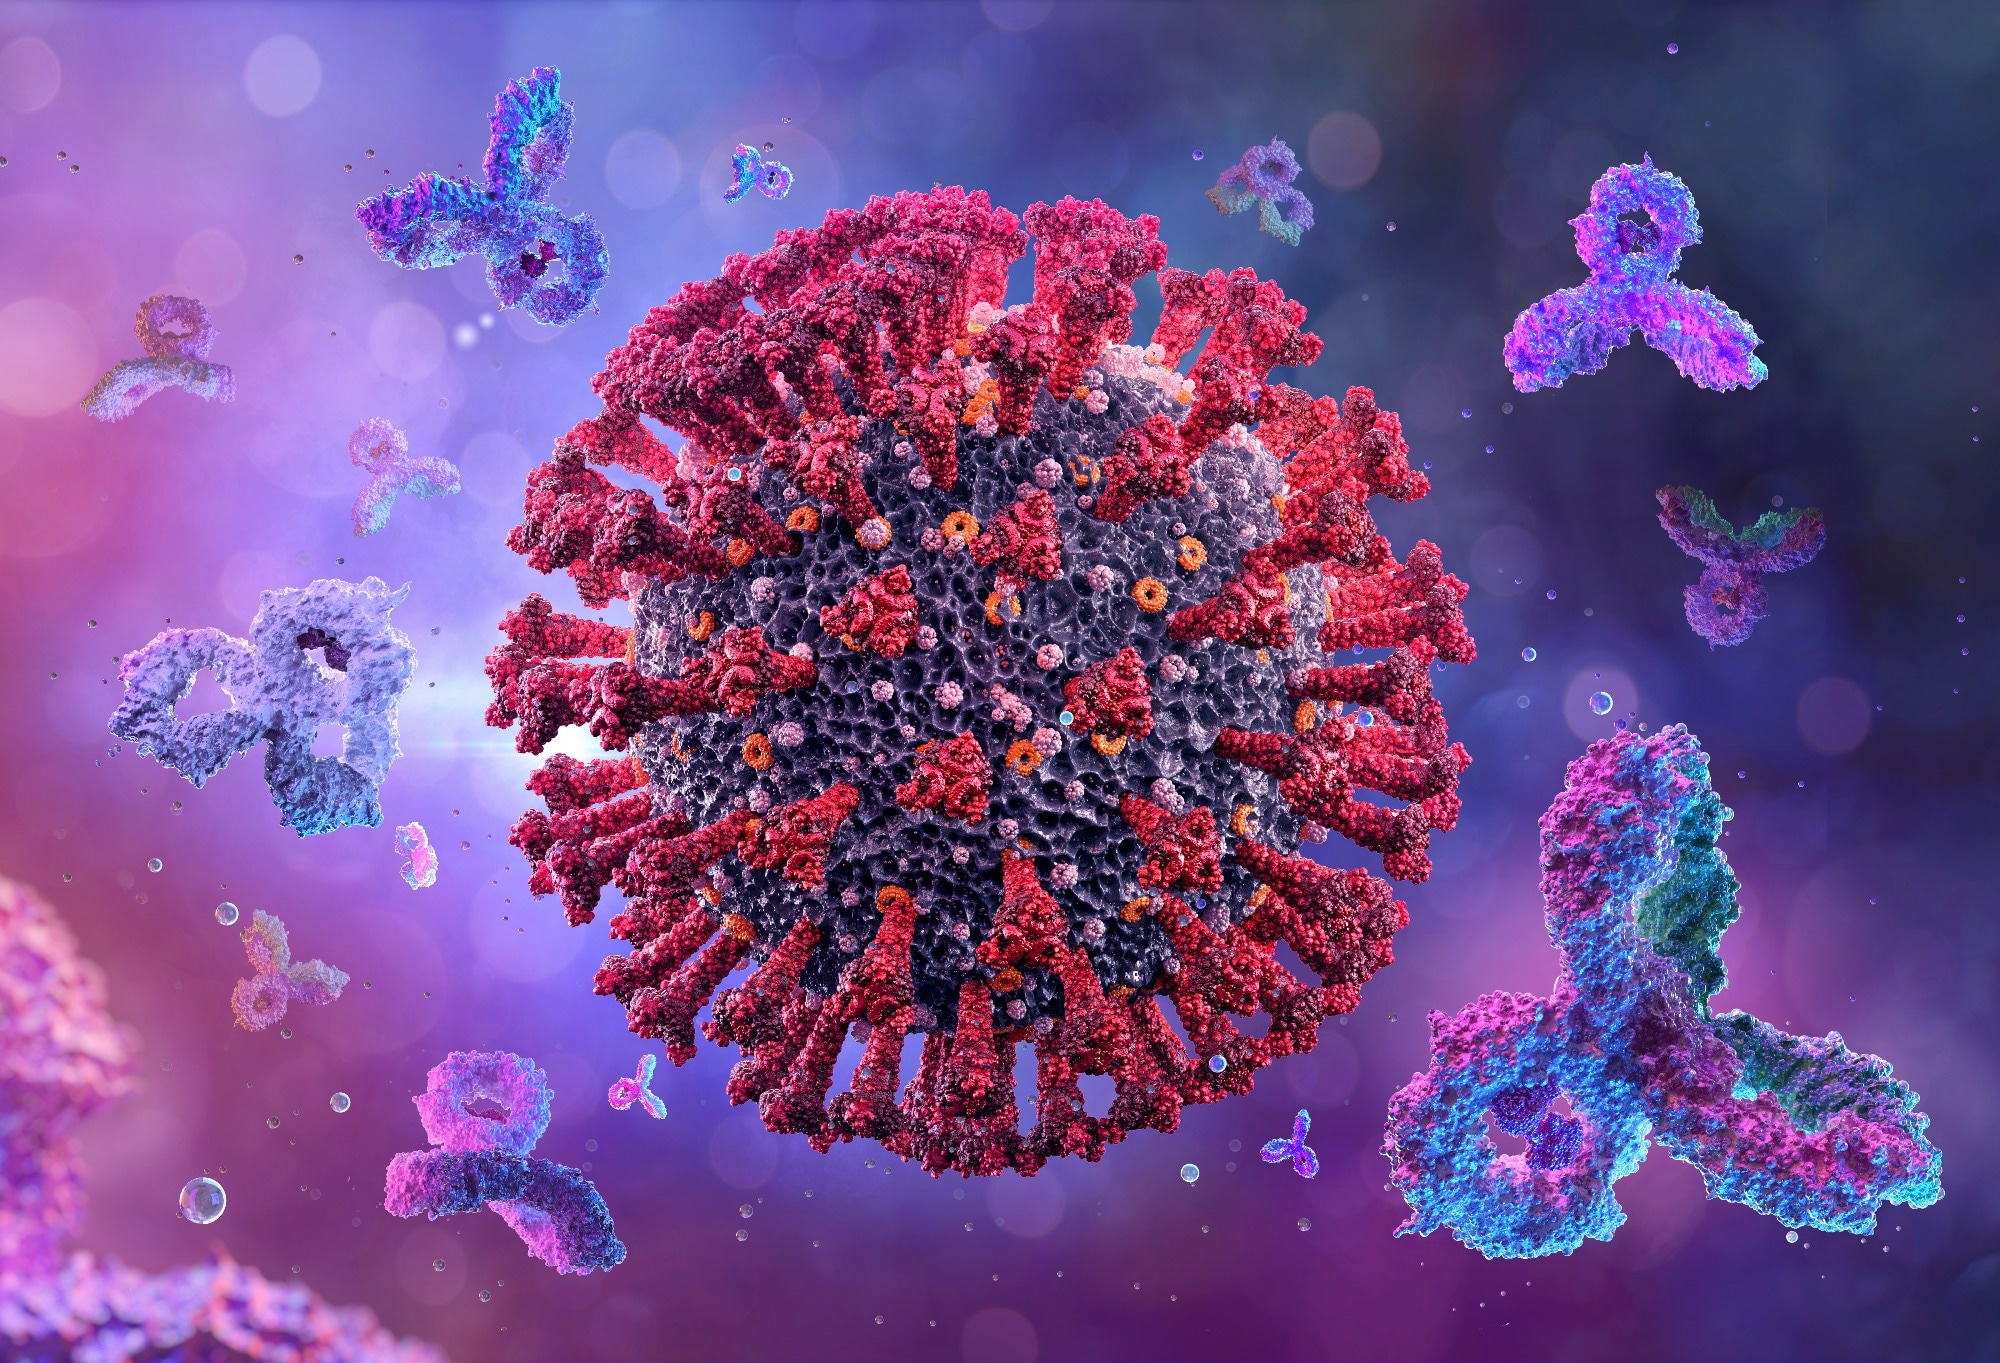 Study: Antibody avidity and multi-specificity combined to confer protection against SARS-CoV-2 and resilience against viral escape. Image Credit: Corona Borealis Studio / Shutterstock